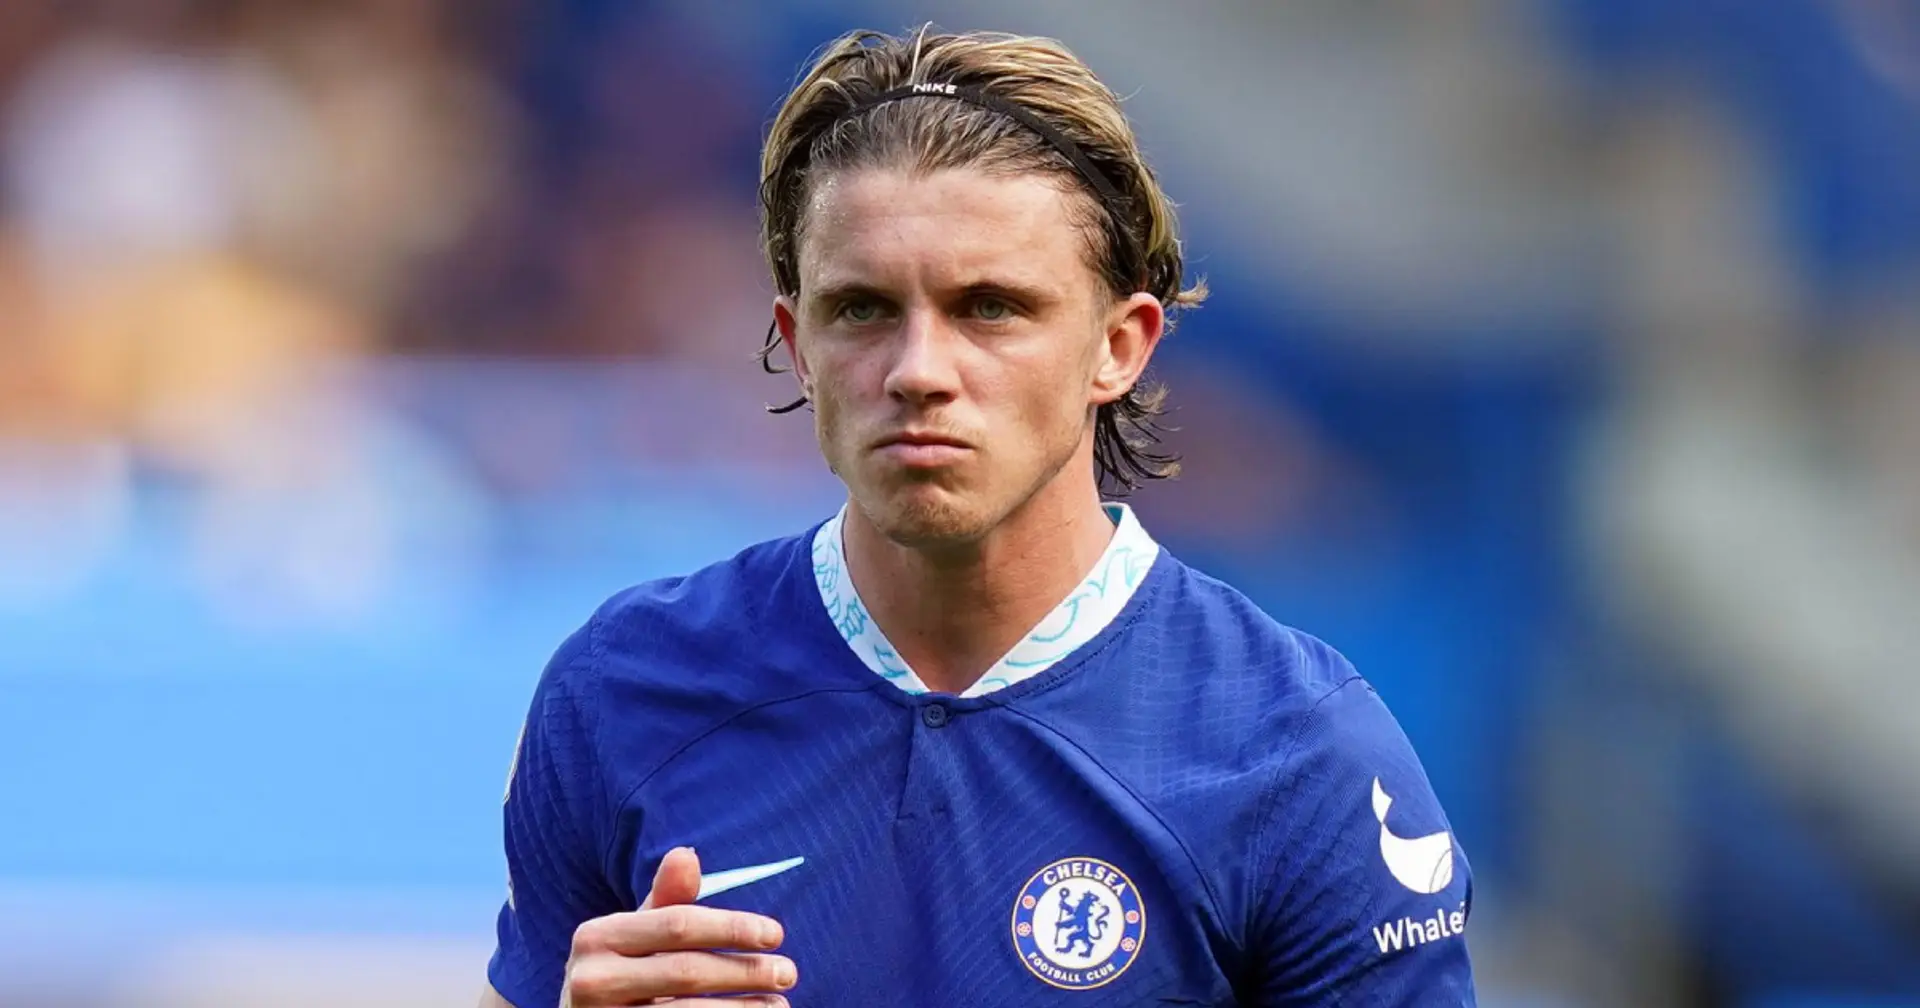 Conor Gallagher expected to leave Chelsea, 2 Premier League clubs interested (reliability: 4 stars)